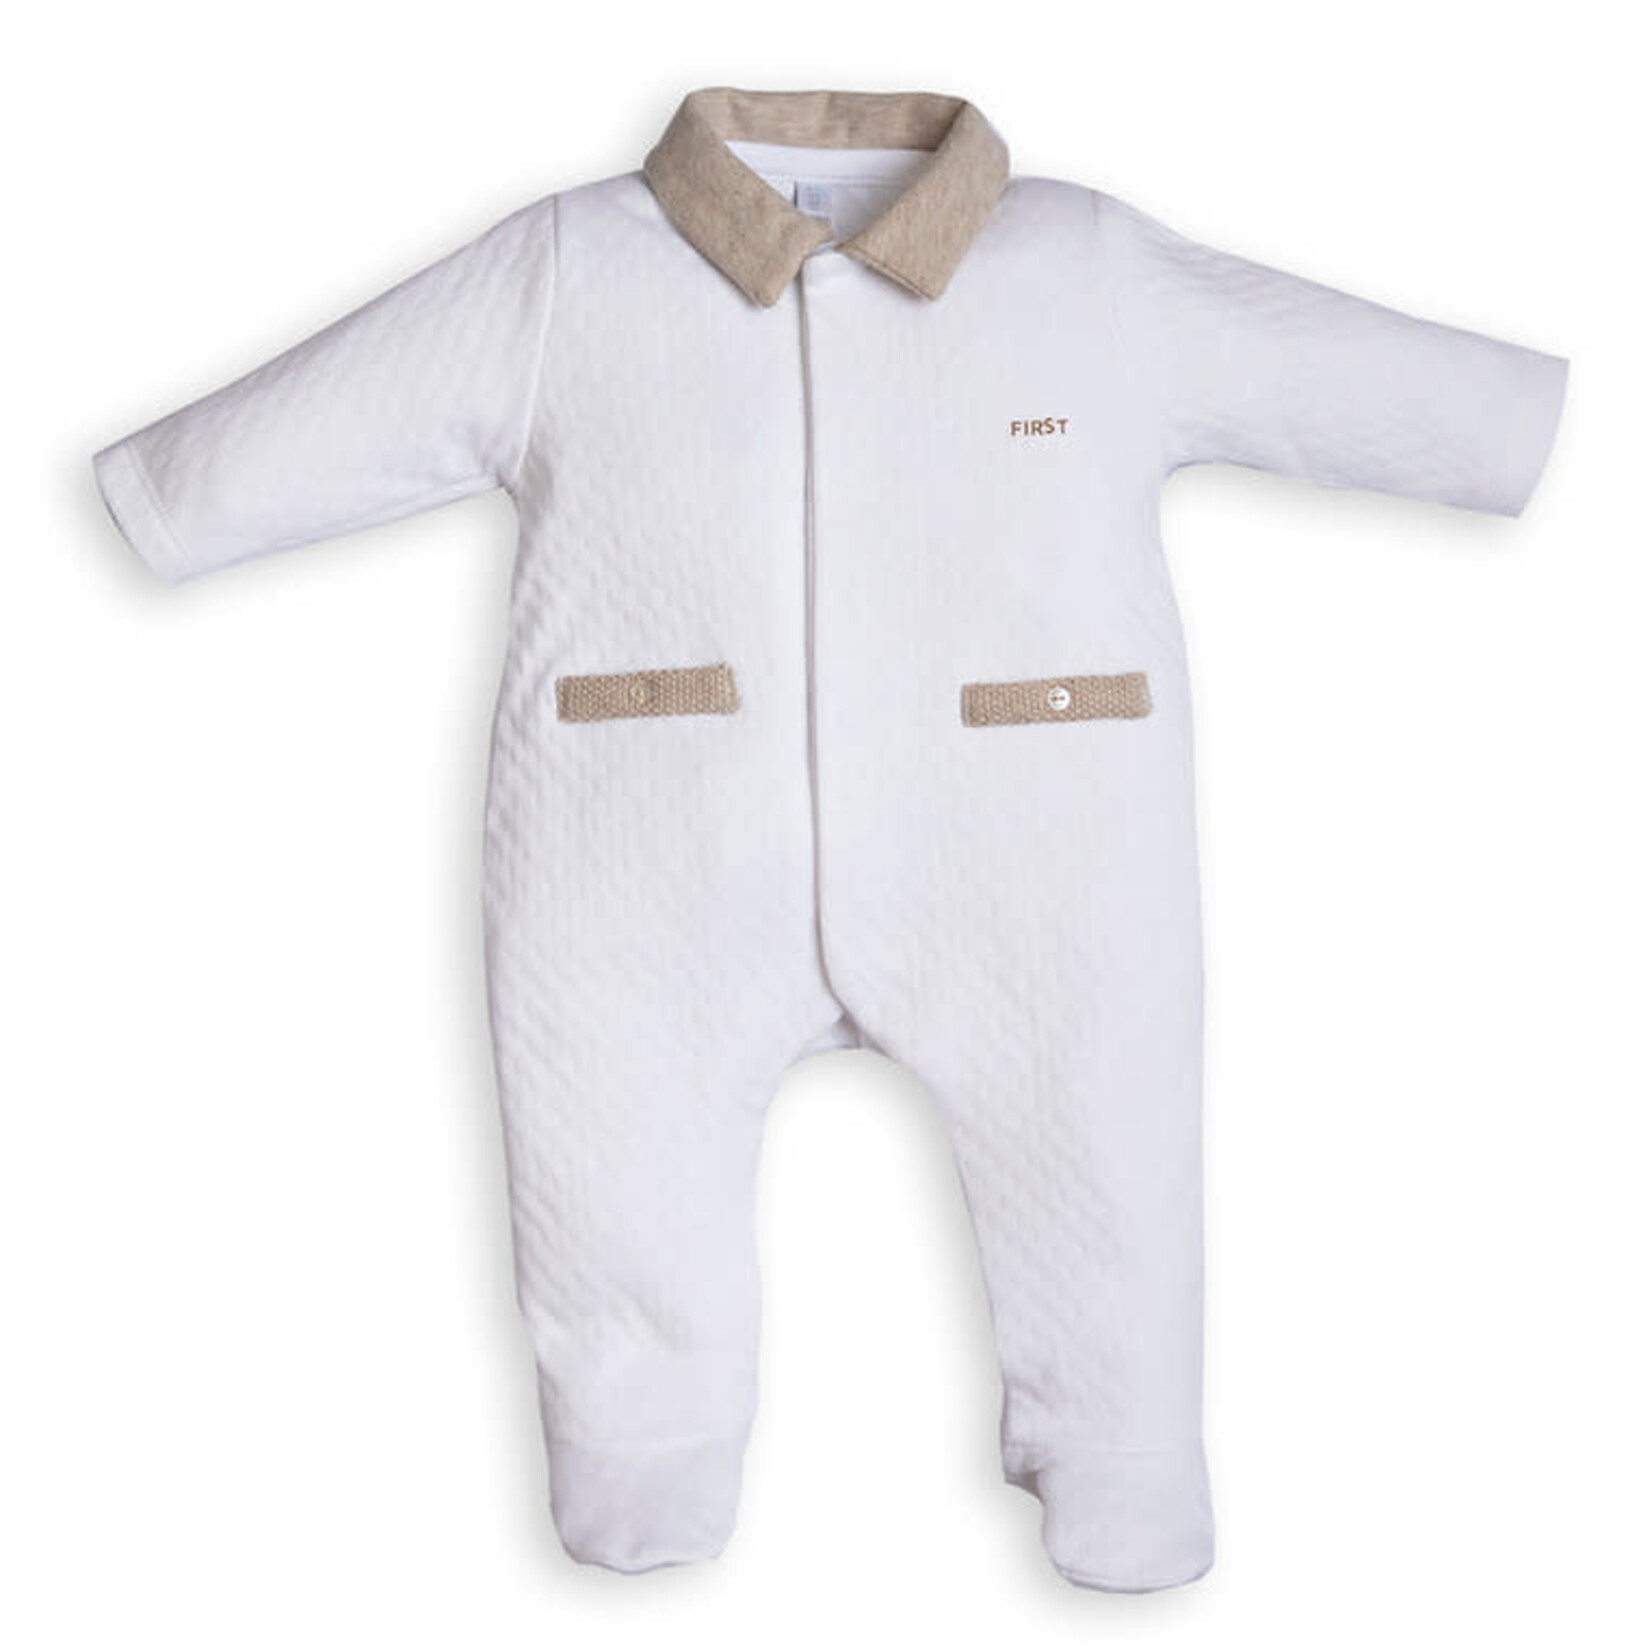 First white/beige rompersuit London